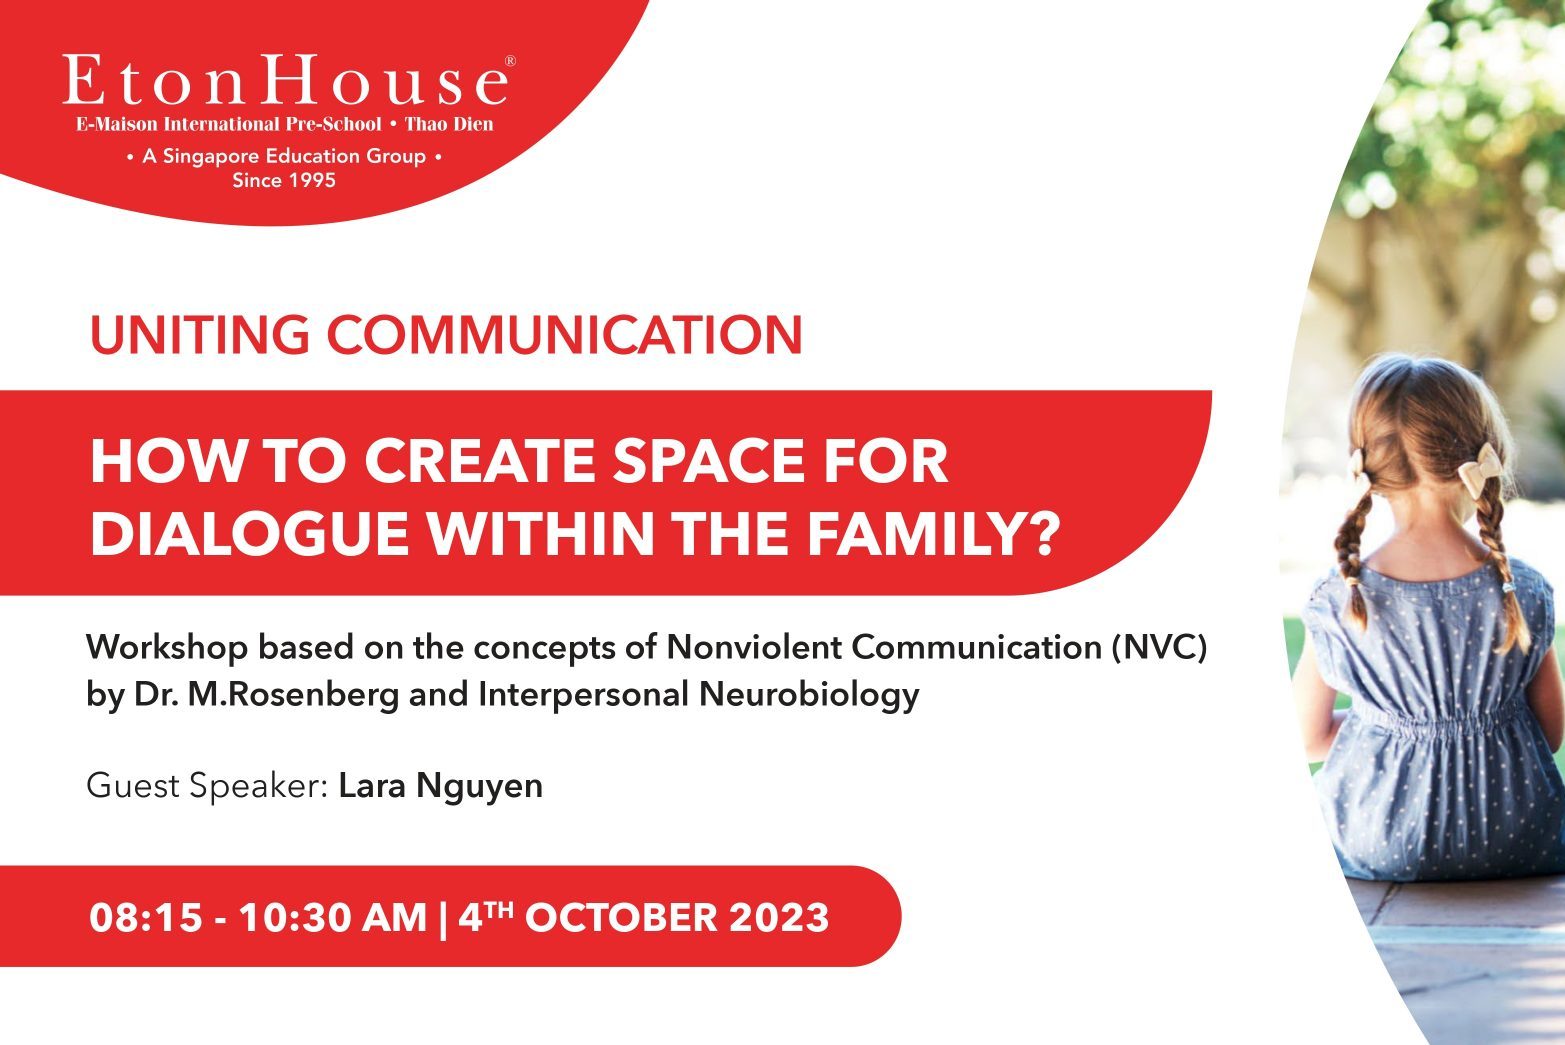 Seminar UNITING COMMUNICATION: “HOW TO CREATE SPACE FOR DIALOGUE WITHIN THE FAMILY?”